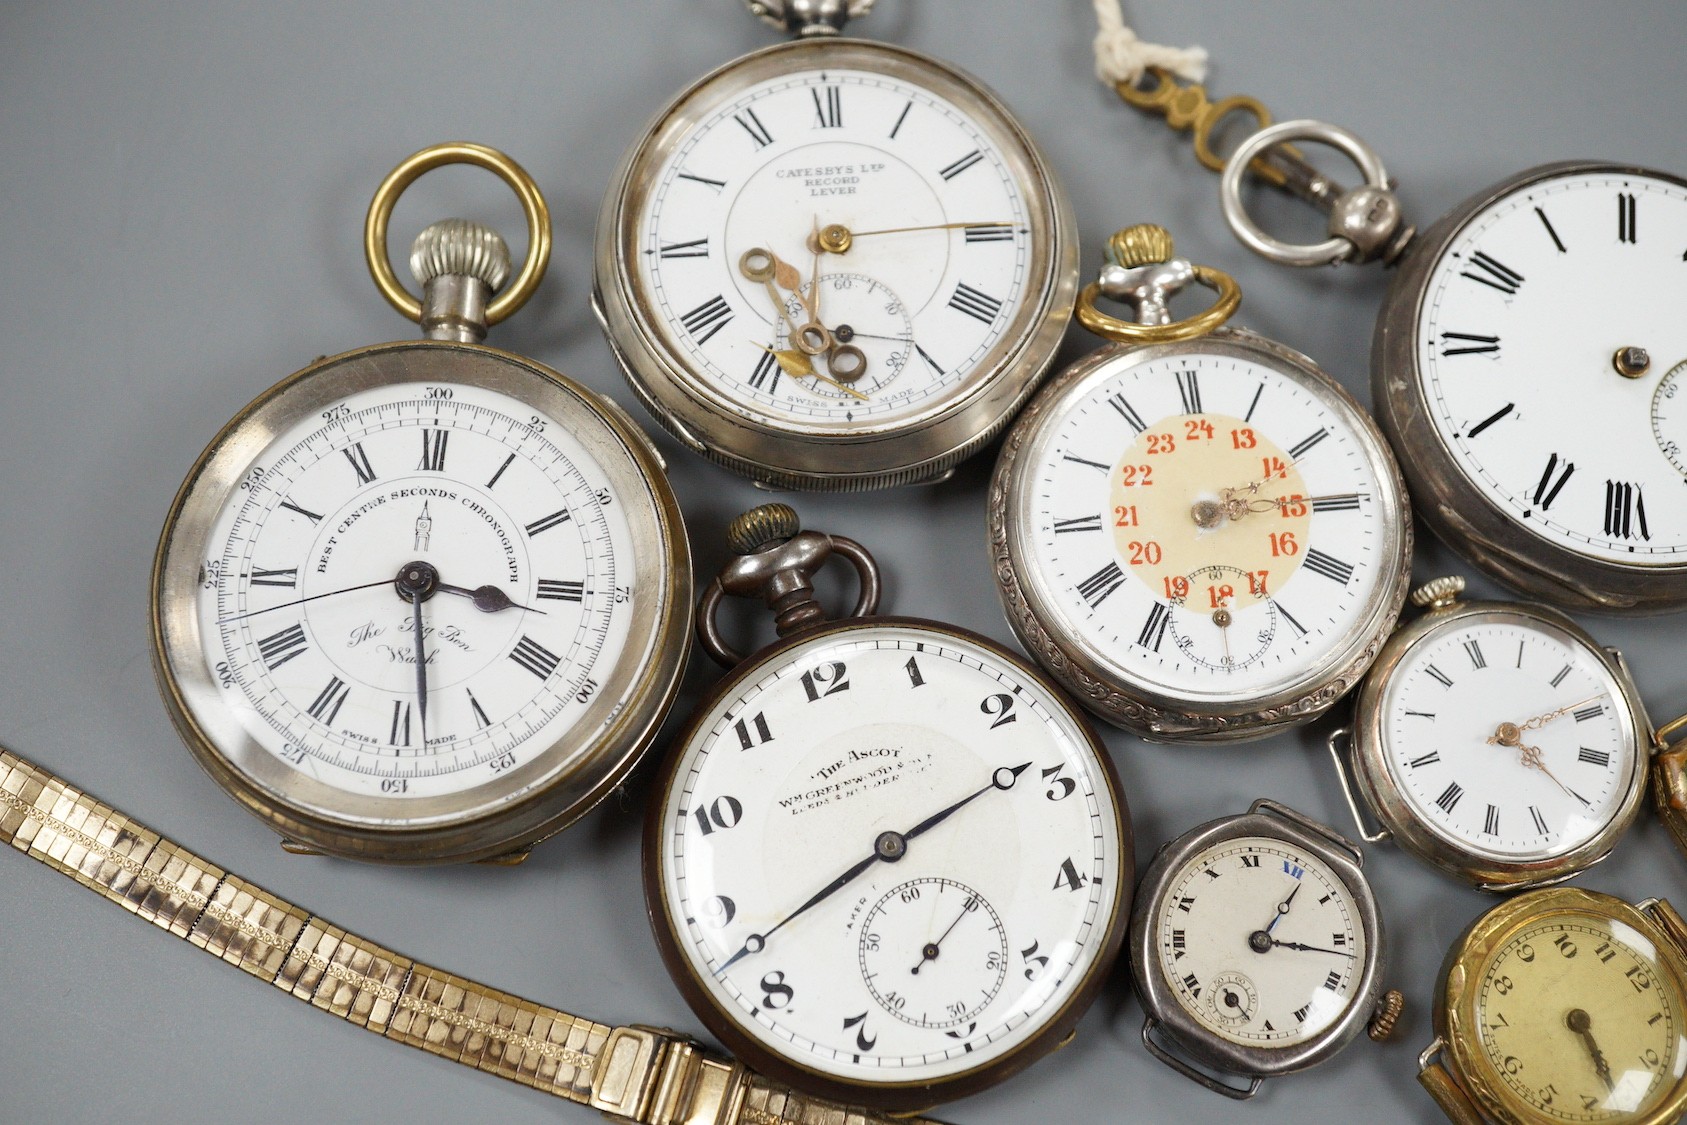 Two silver open faced pocket watches including Catesbys Ltd Record Lever, a German 800 pocket watch, two other base metal pocket watches, four assorted wrist watches and a gilt metal watch bracelet.